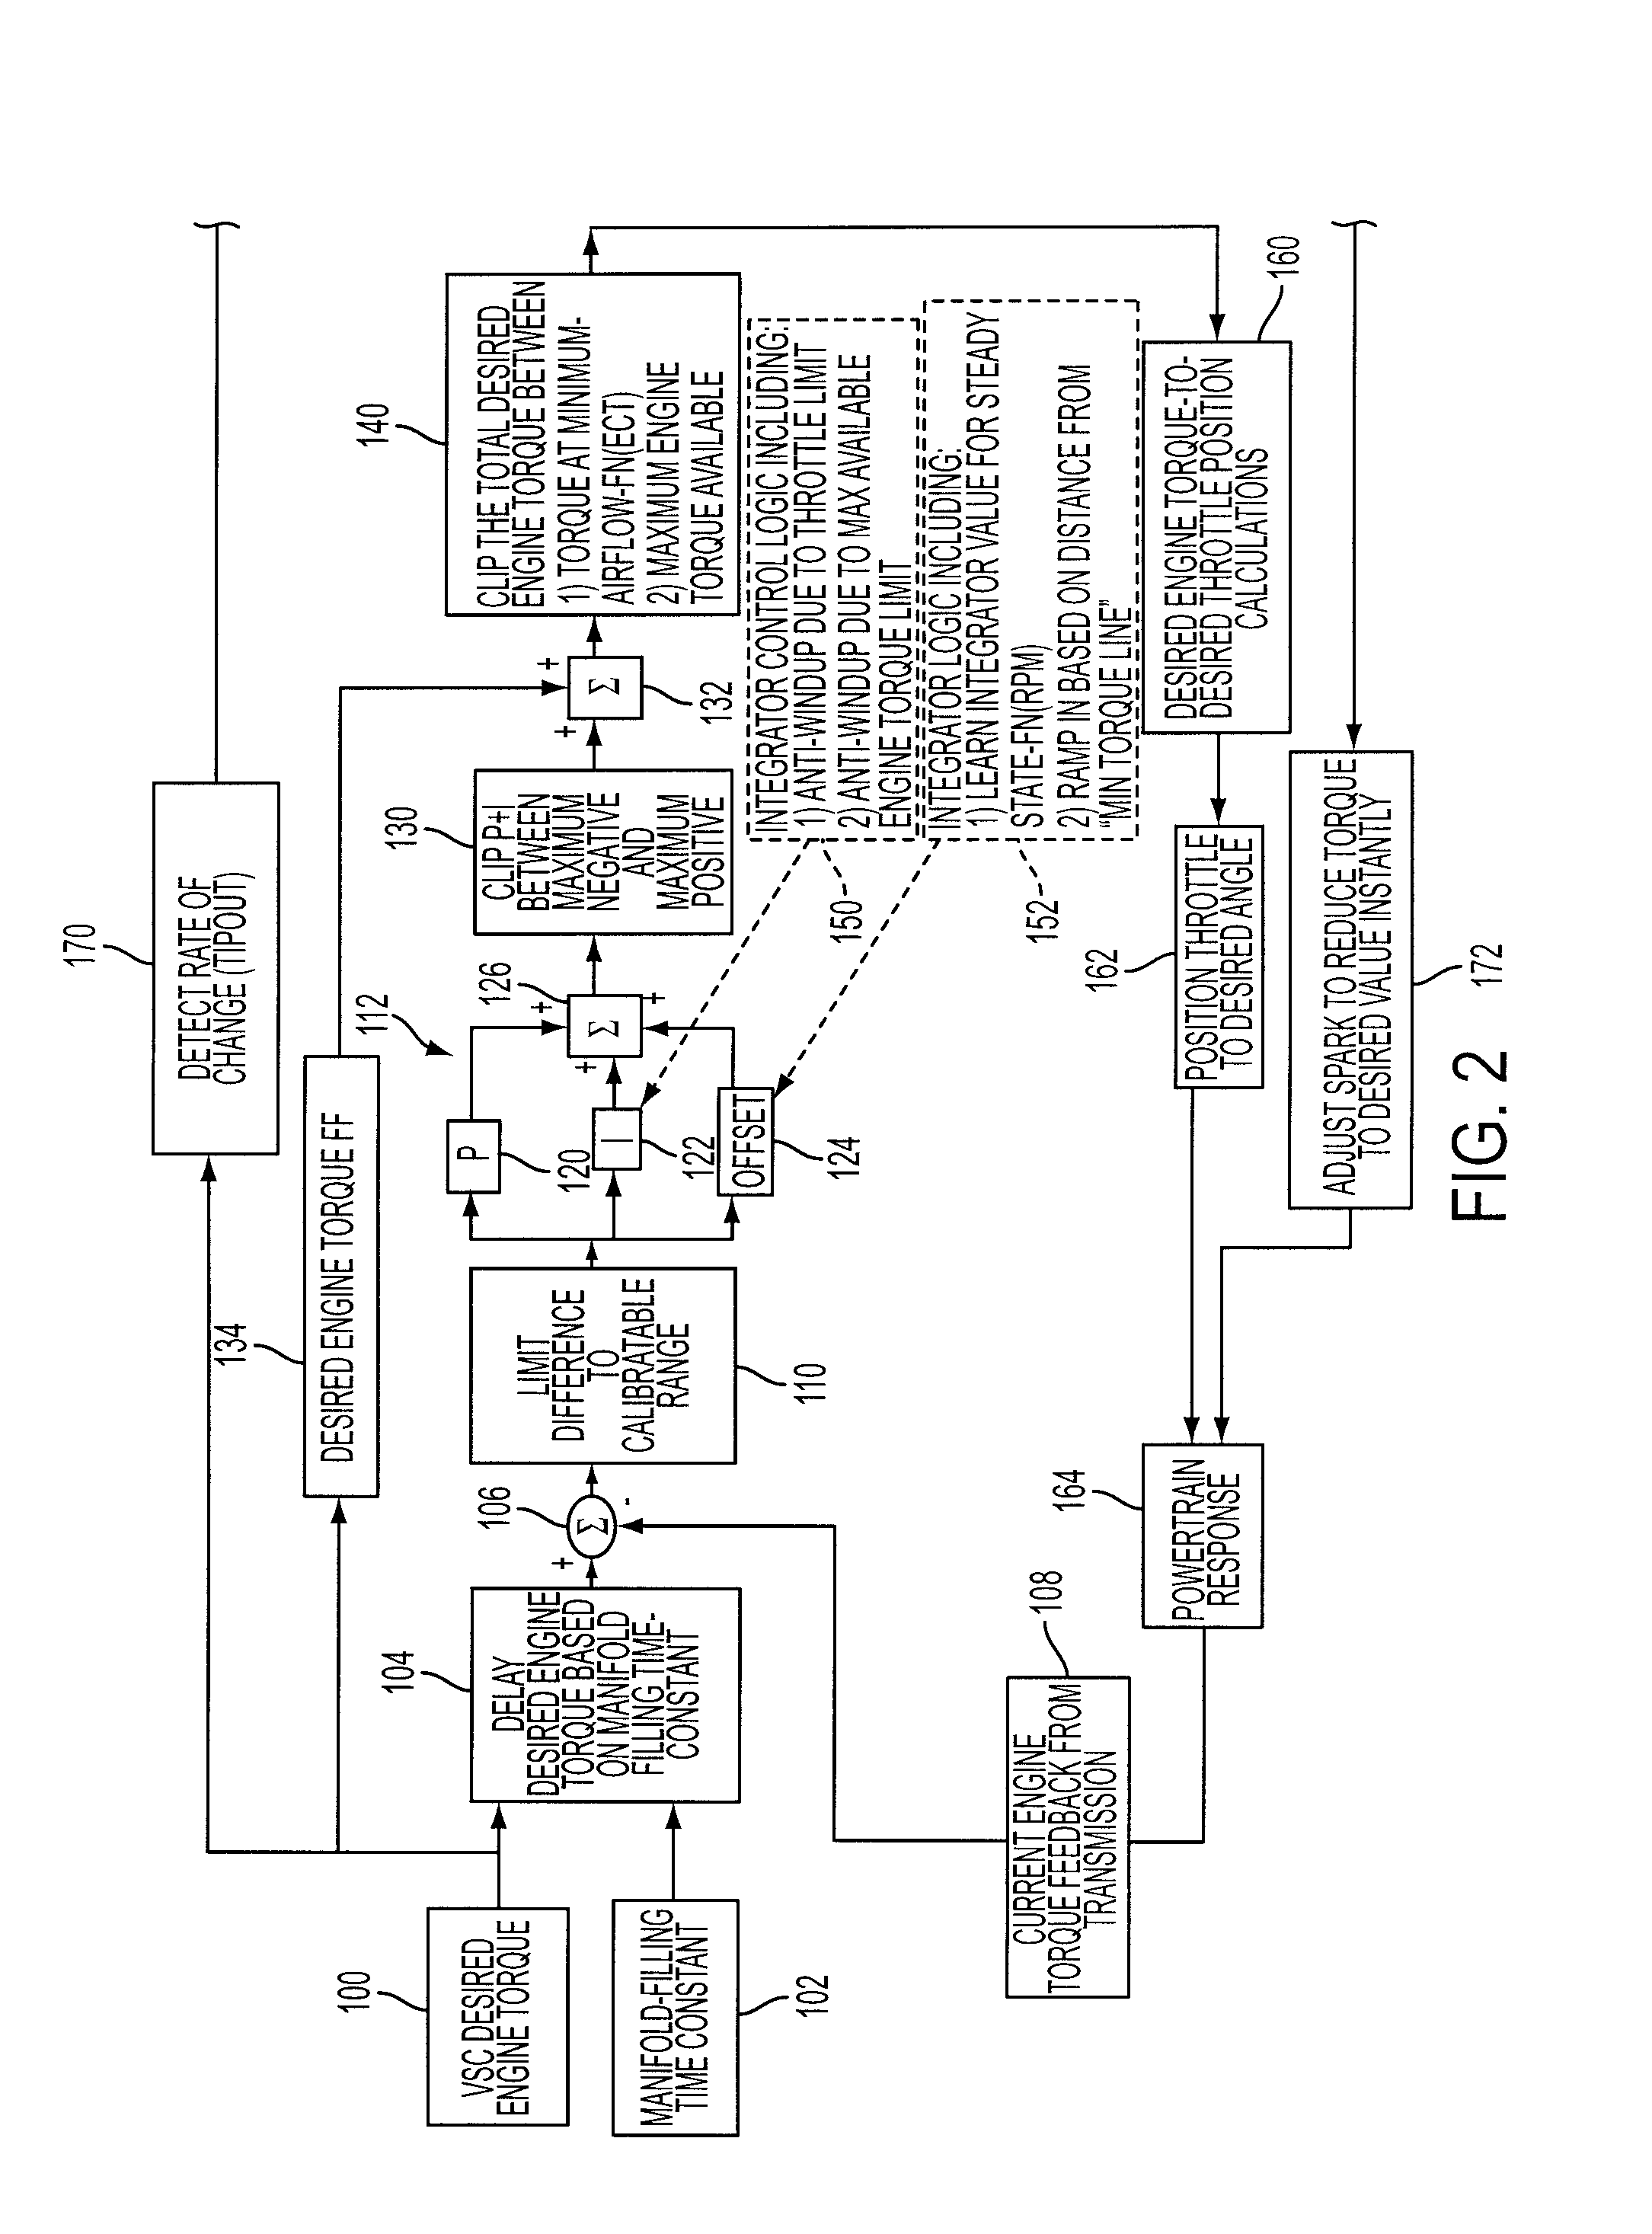 Torque-based powertrain control for vehicles